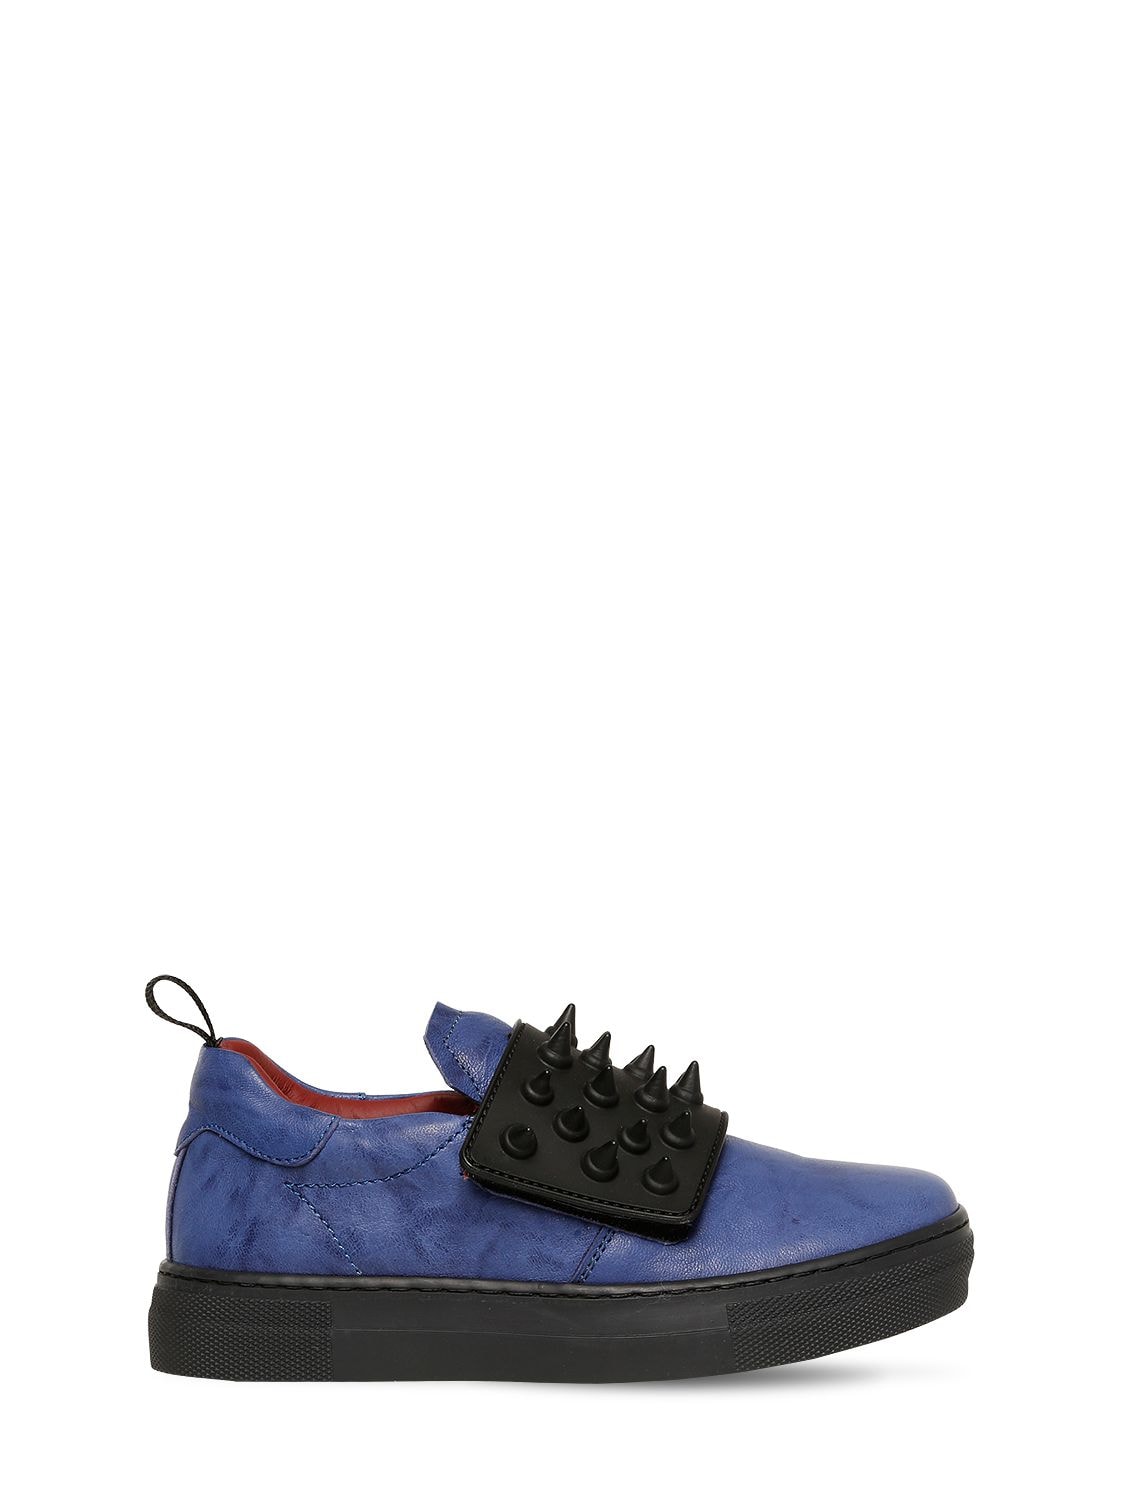 Am 66 Kids' Spiked Leather Slip-on Trainers In Blue,black